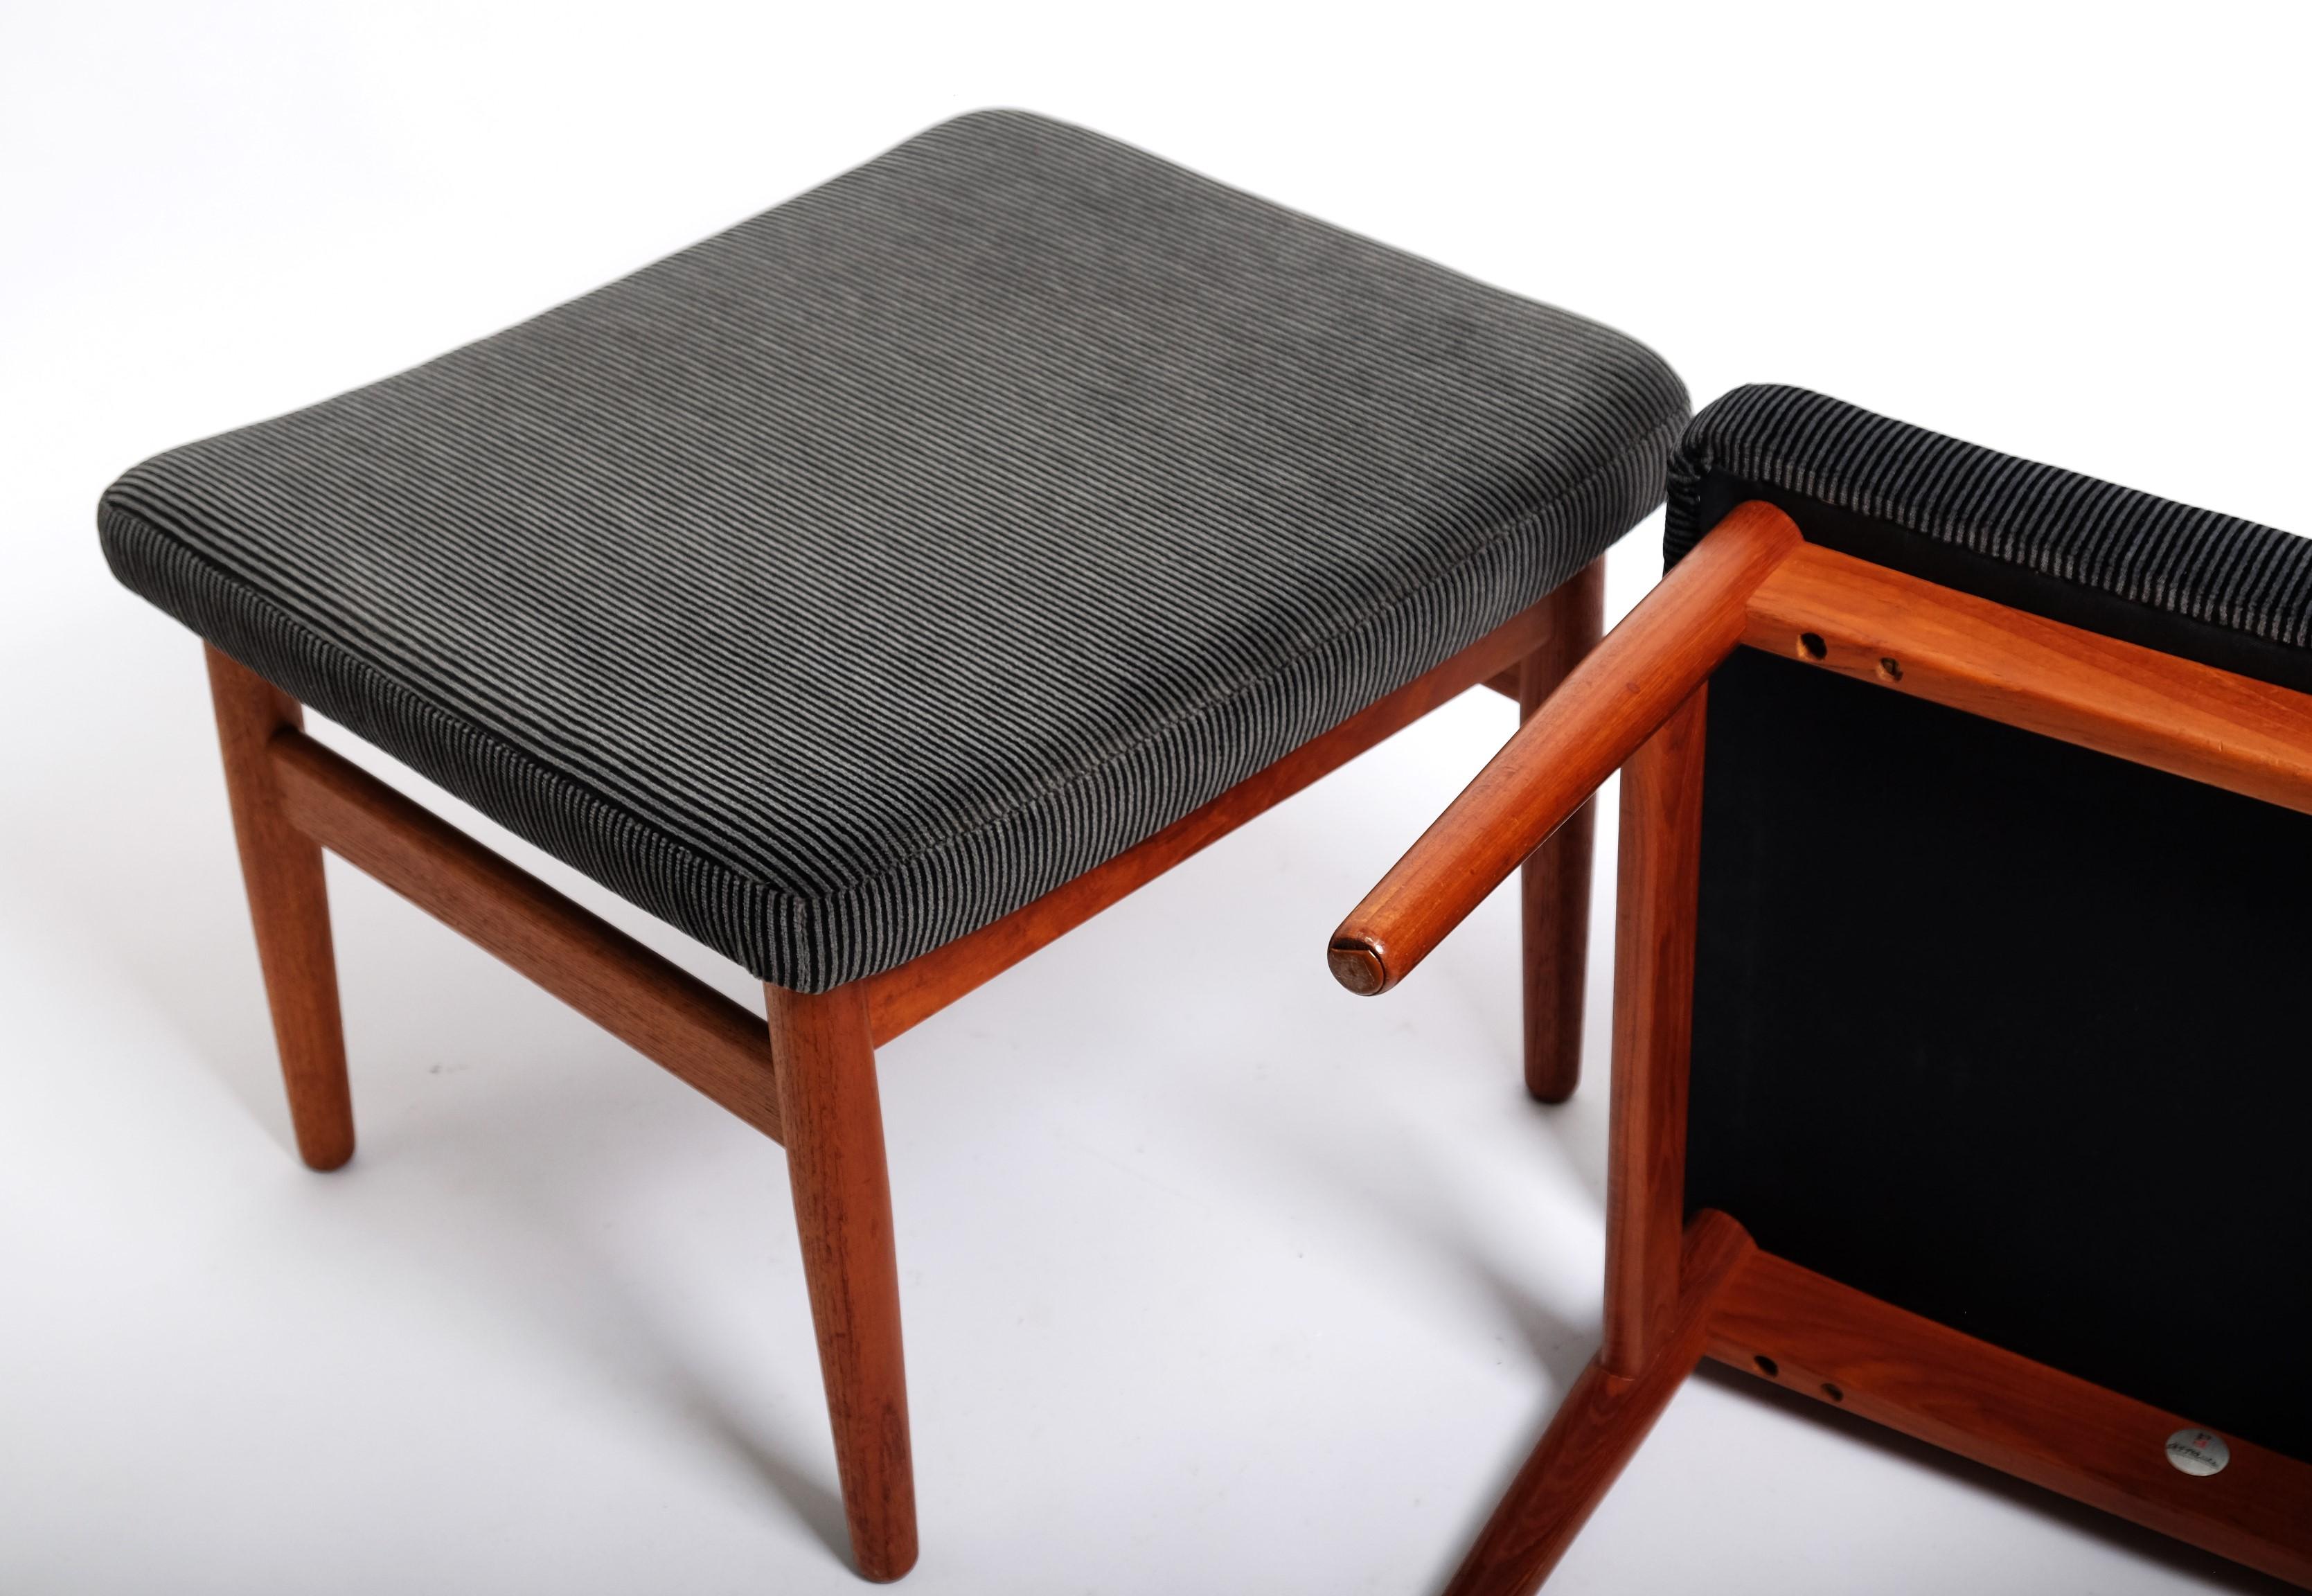 Two Mid-Century Stools by Arne Vodder FD164 Ottomans France & Son, Denmark 1960s For Sale 9